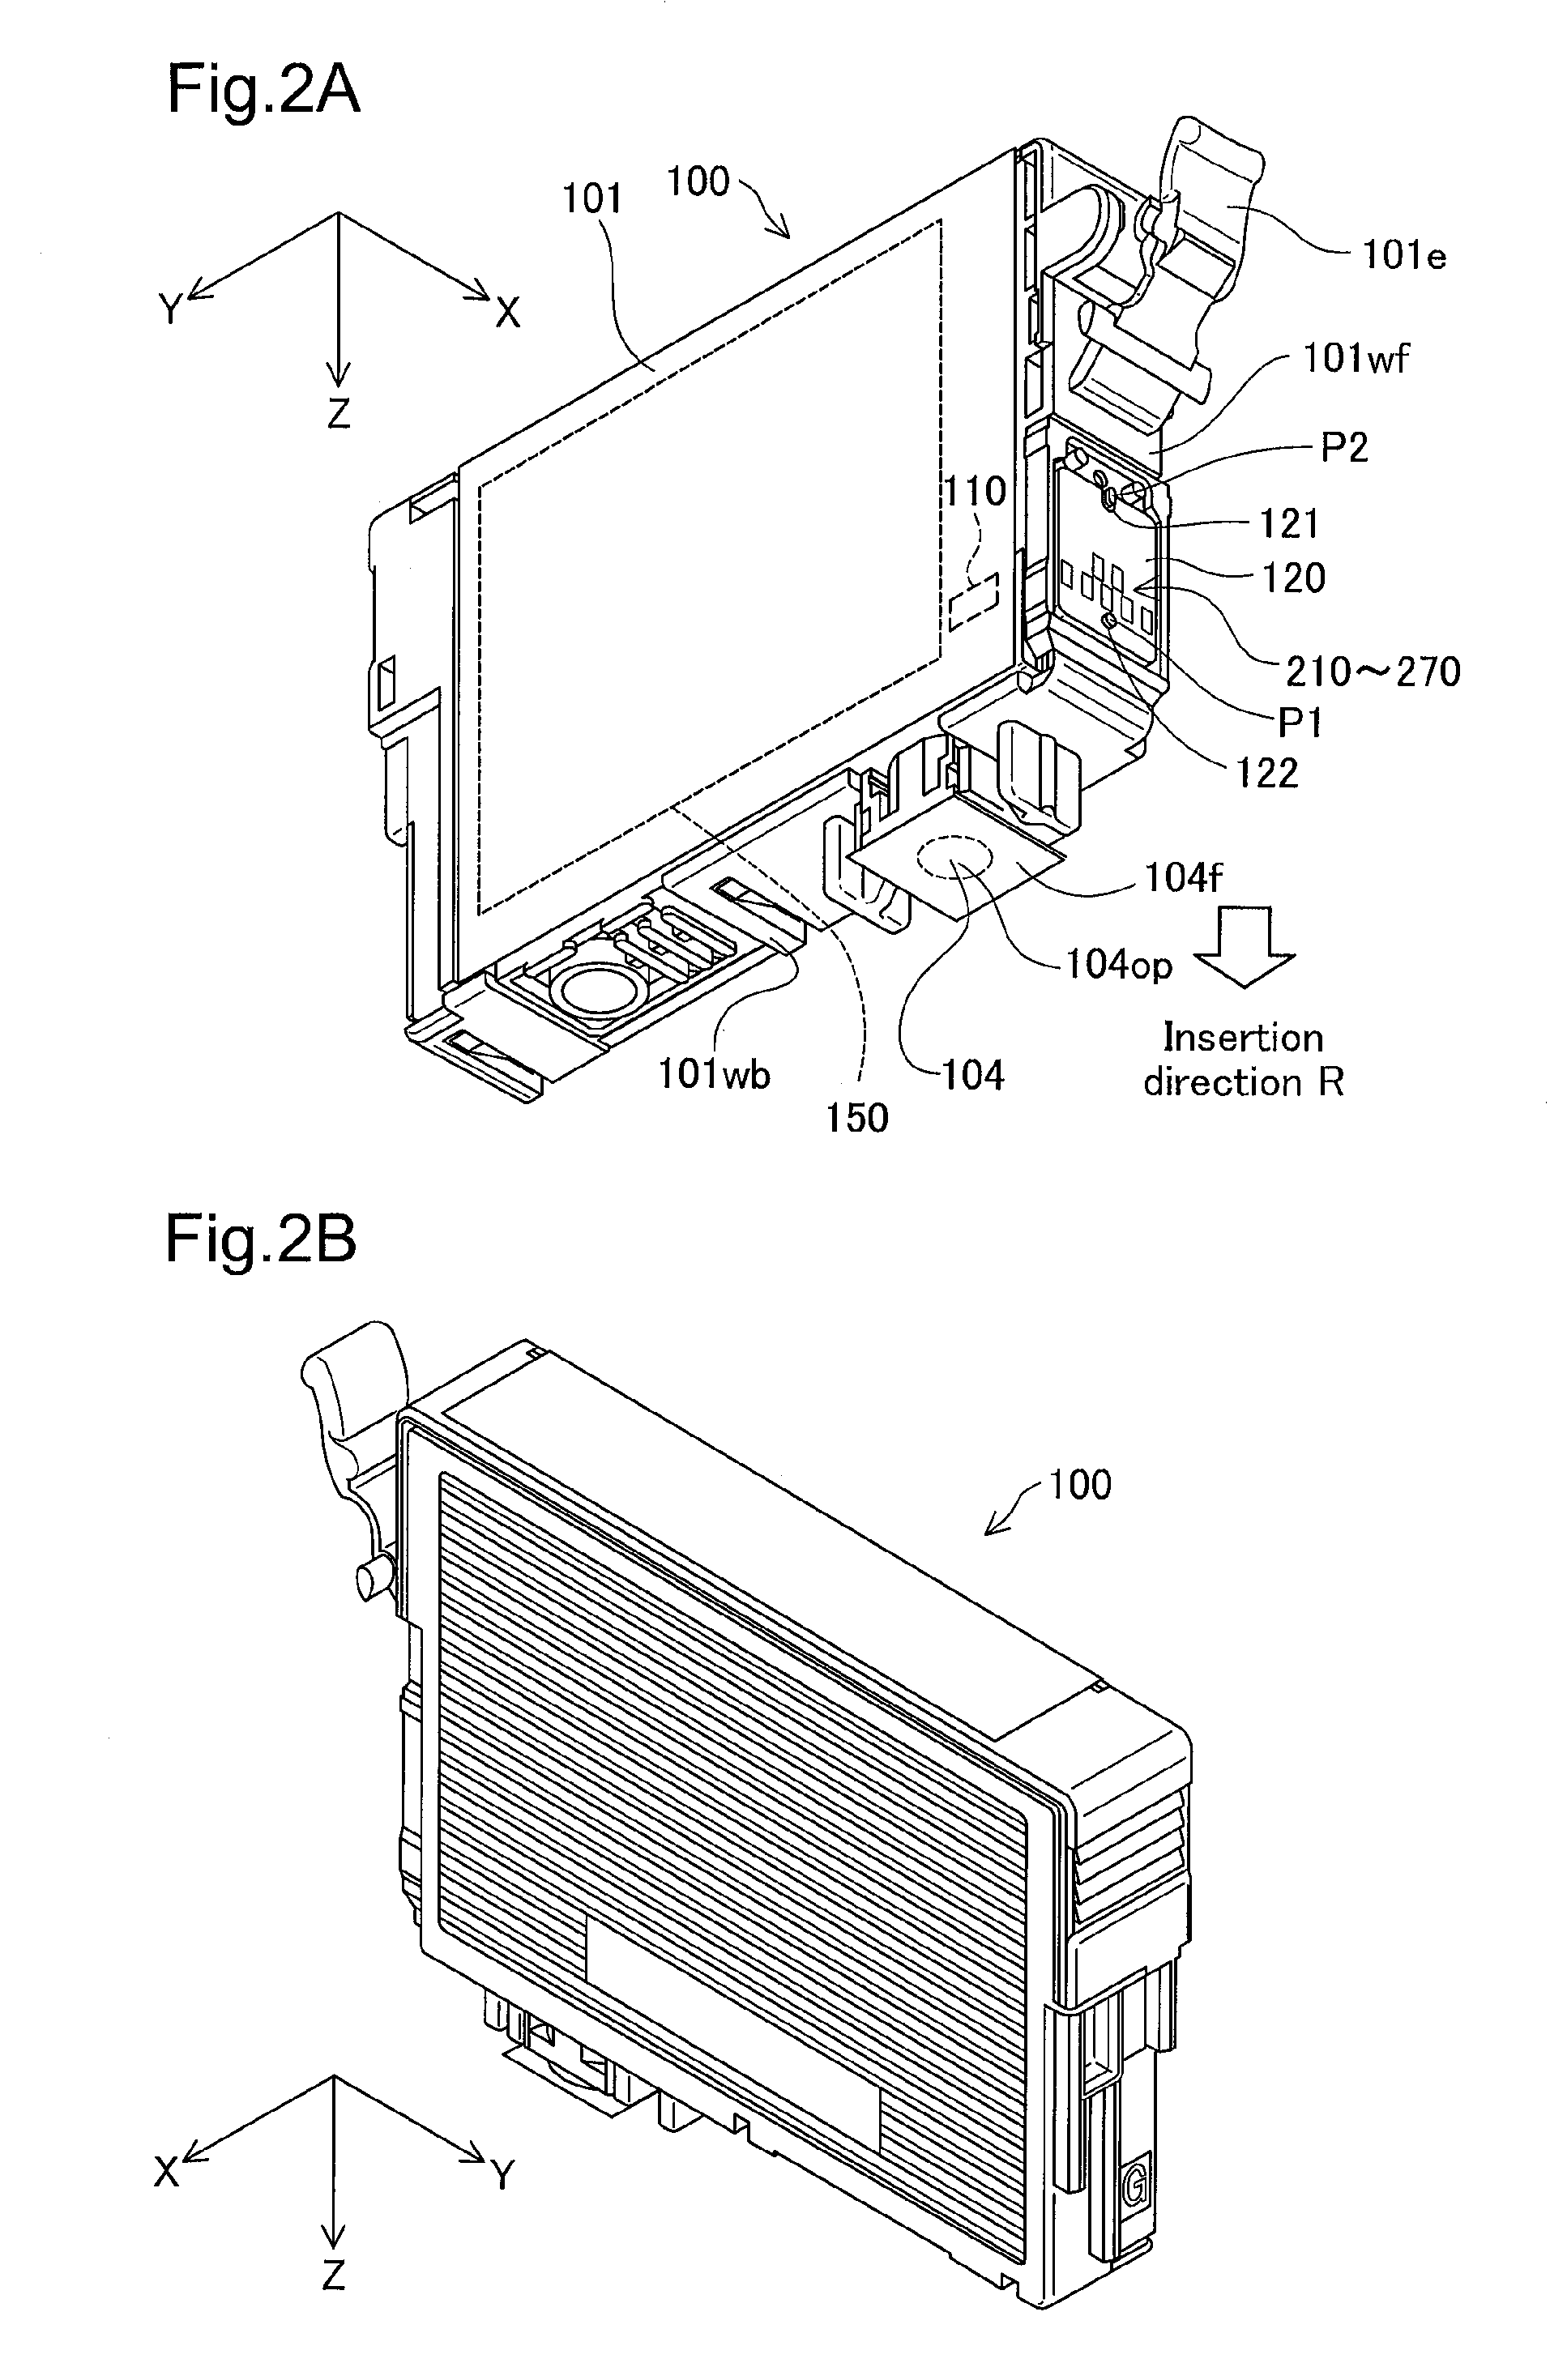 Memory device, host circuit, circuit board, liquid receptacle, method of transmitting data stored in a nonvolatile data memory section to a host circuit, and system including a host circuit and a memory device detachably attachable to the host circuit